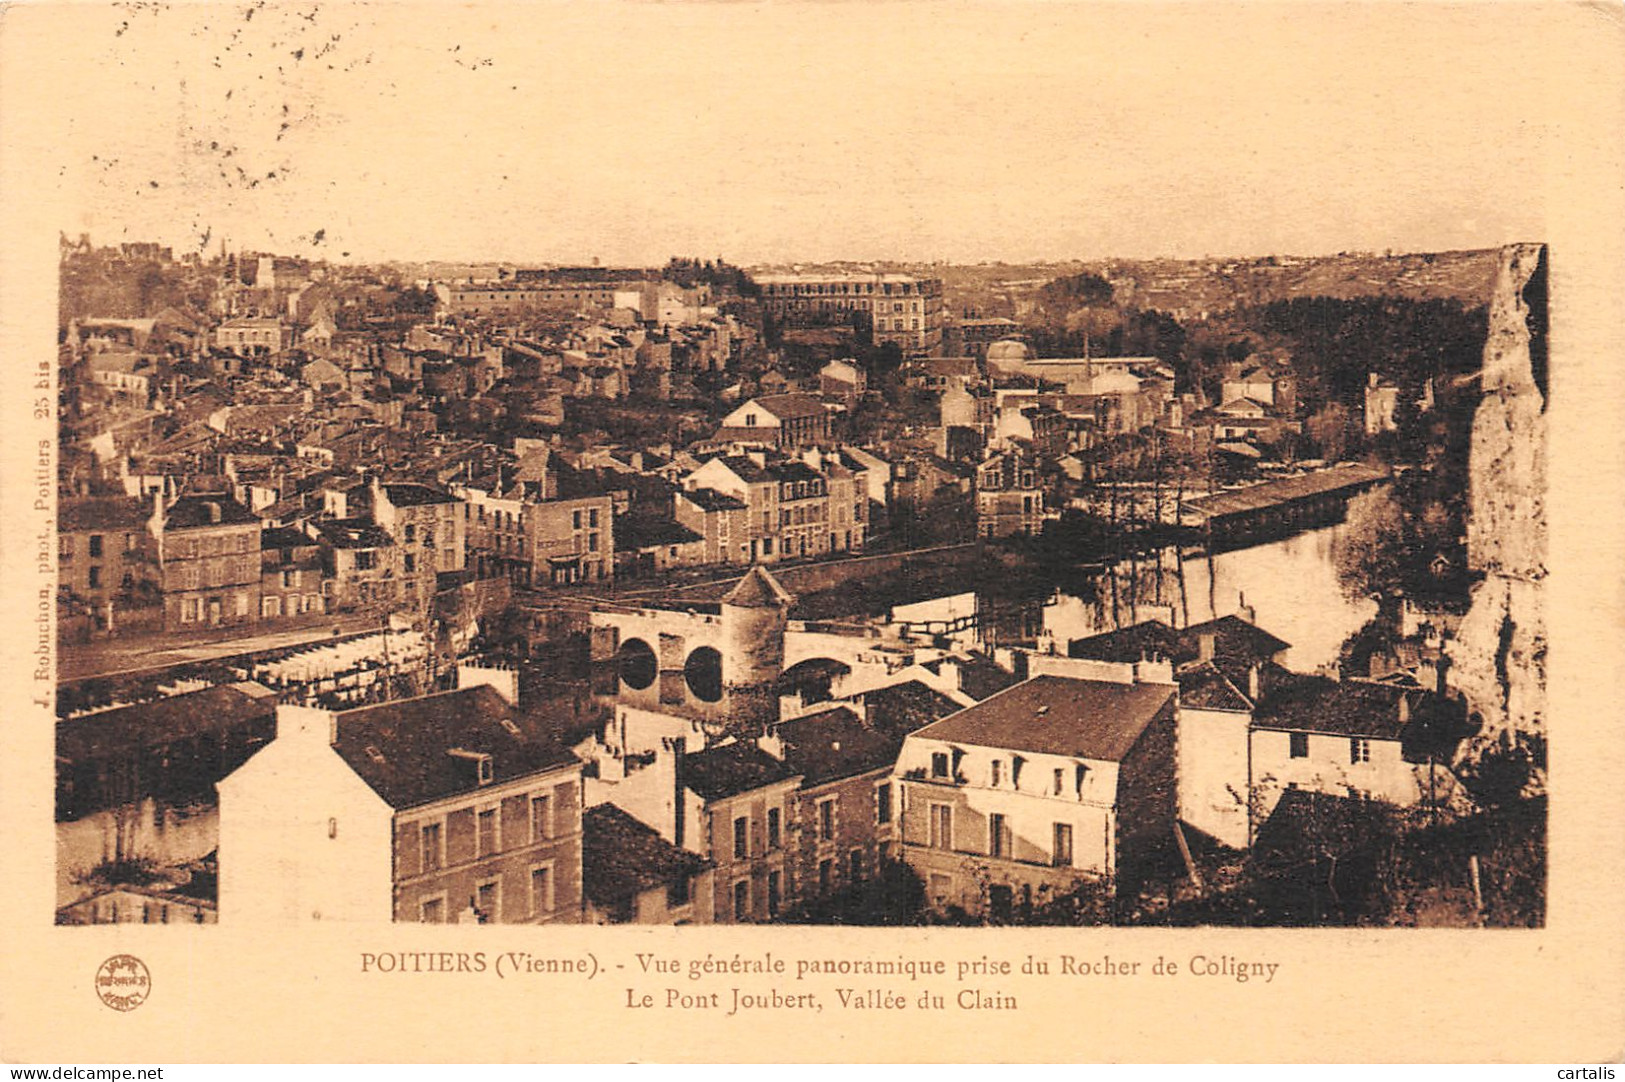 86-POITIERS-N°4191-C/0199 - Poitiers